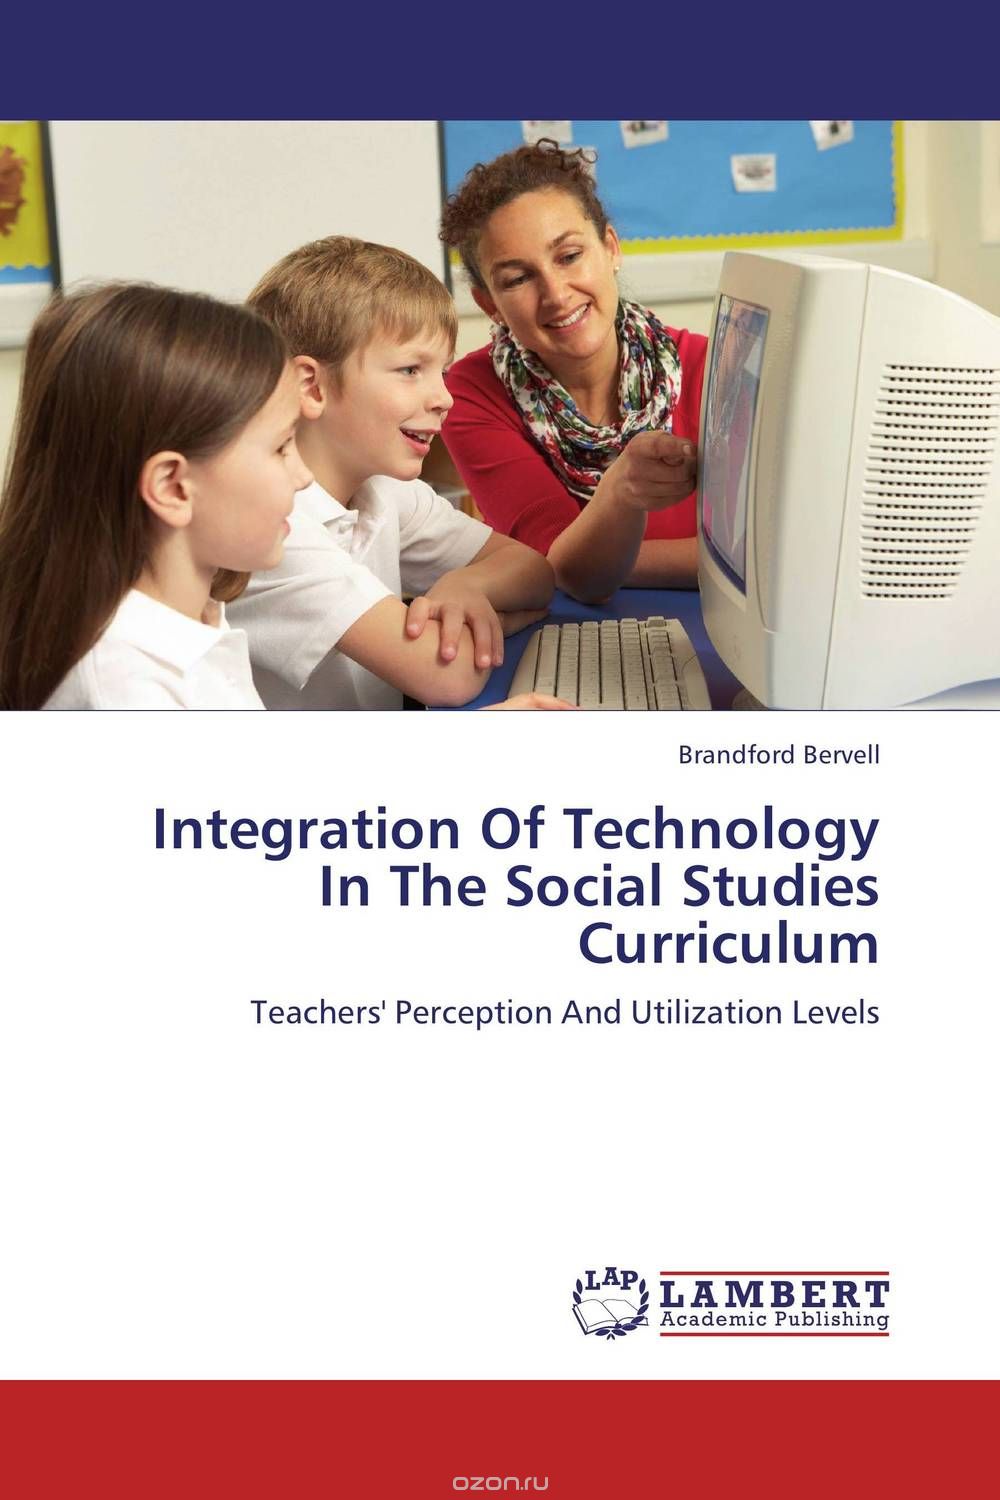 Integration Of Technology In The Social Studies Curriculum